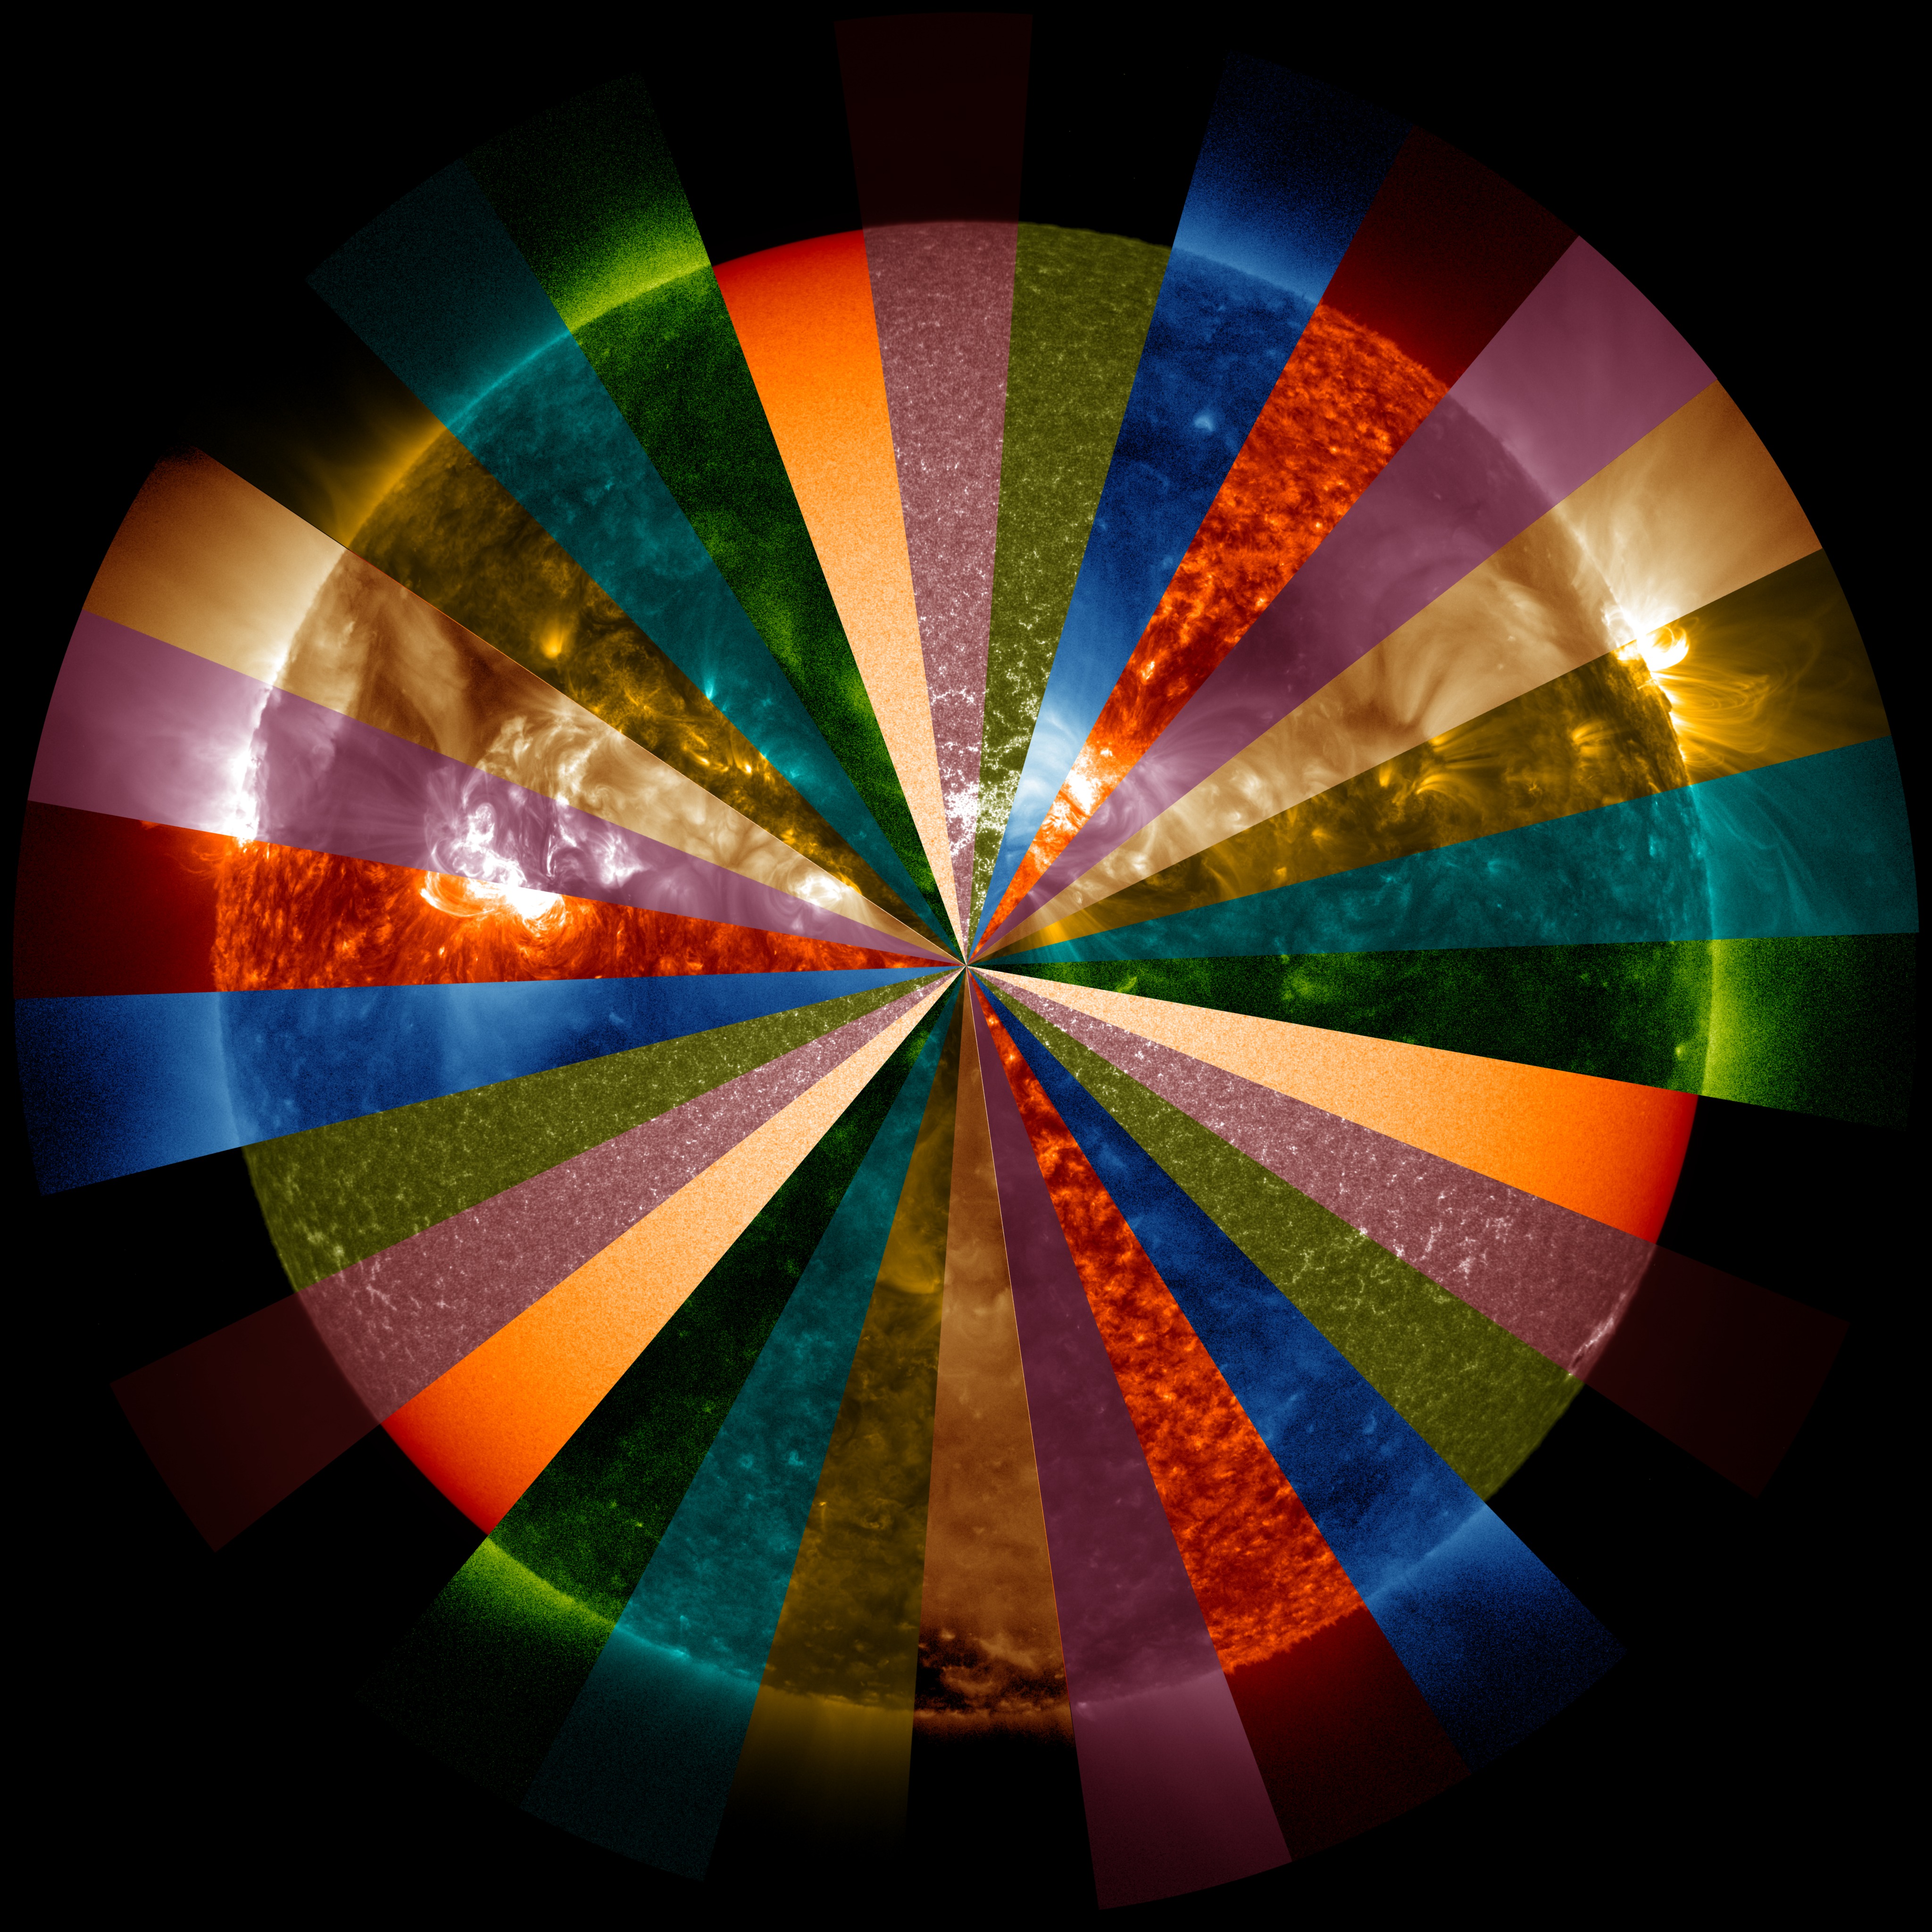 The Sun visualized in multiple pie slice wavelengths.